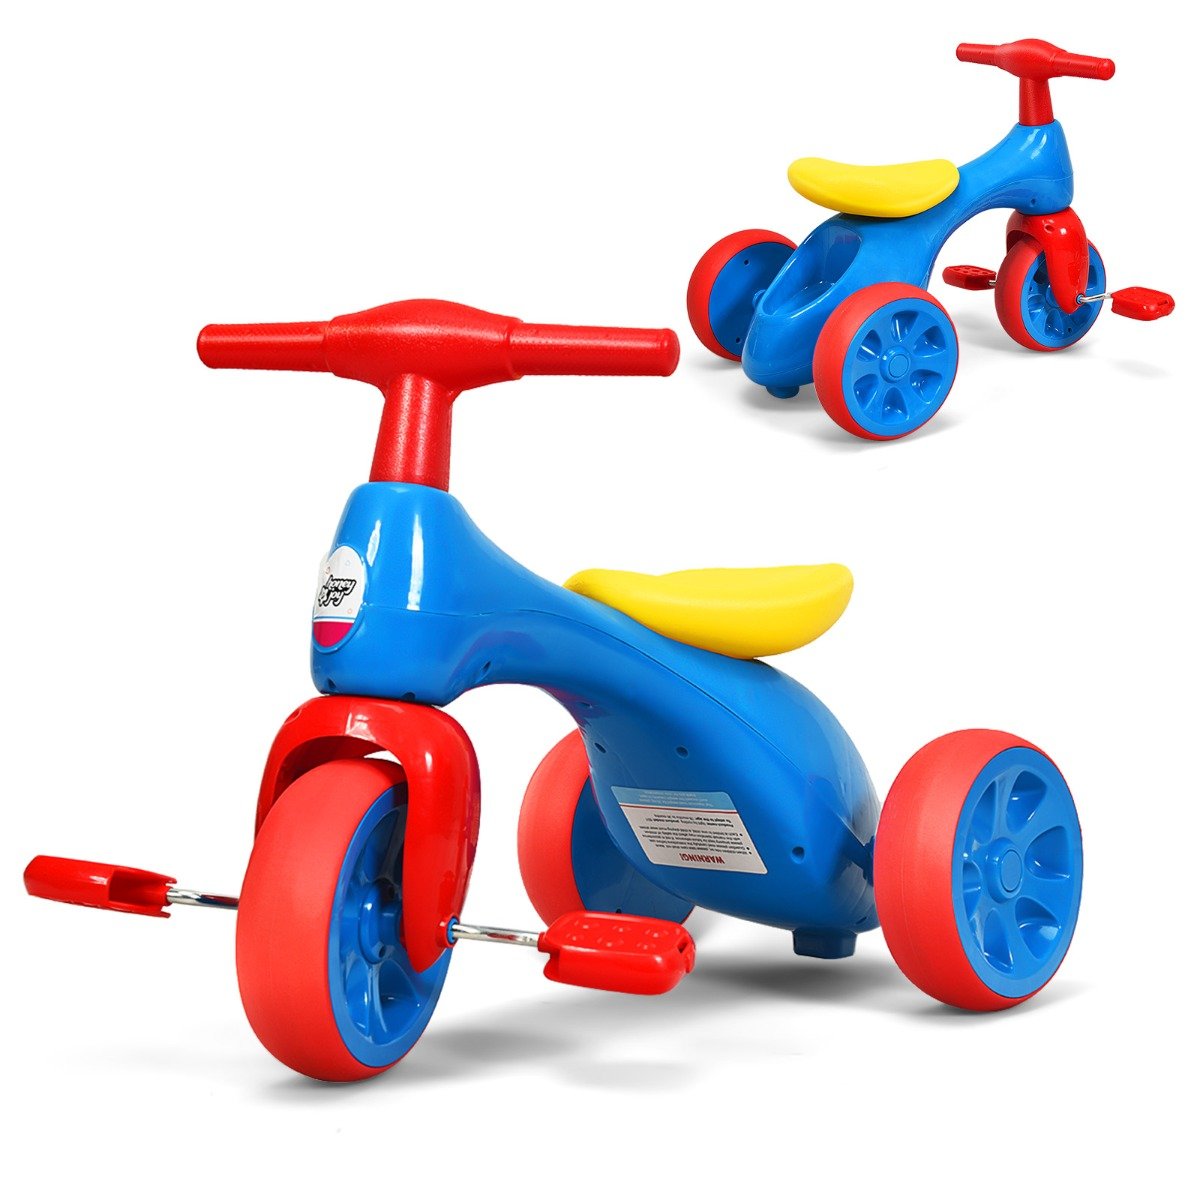 Blue Toddler Tricycle: Explore with Foot Pedal Fun for Growing Kids